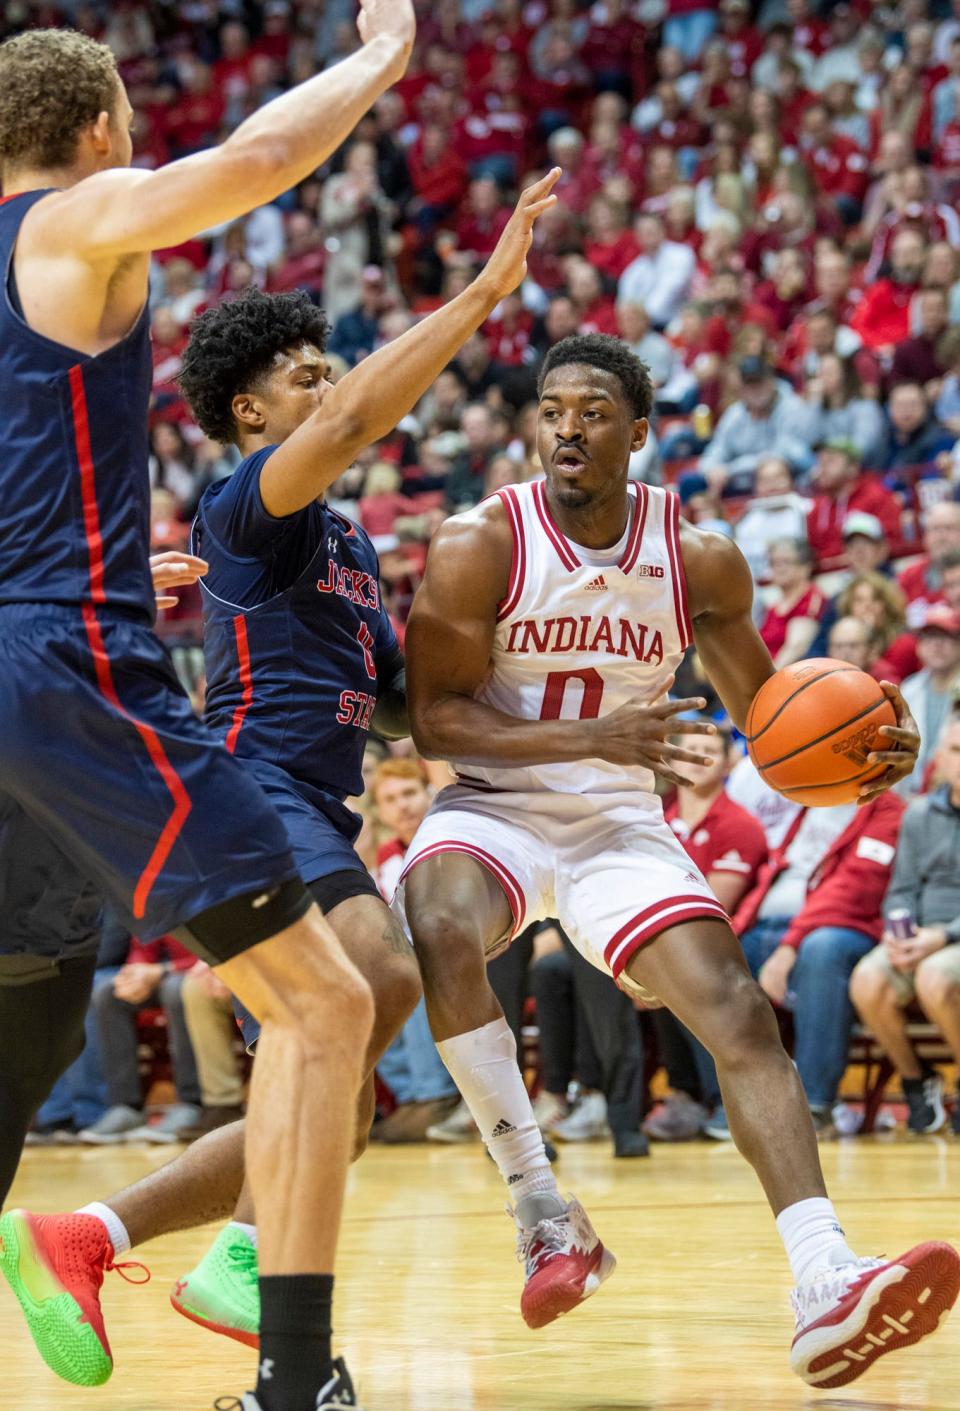 Indiana's Xavier Johnson (0) draws a double team during the first half of the Indiana versus Jackson State men's basketball game at Simon Skjodt Assembly Hall on Friday, Nov. 25, 2022.